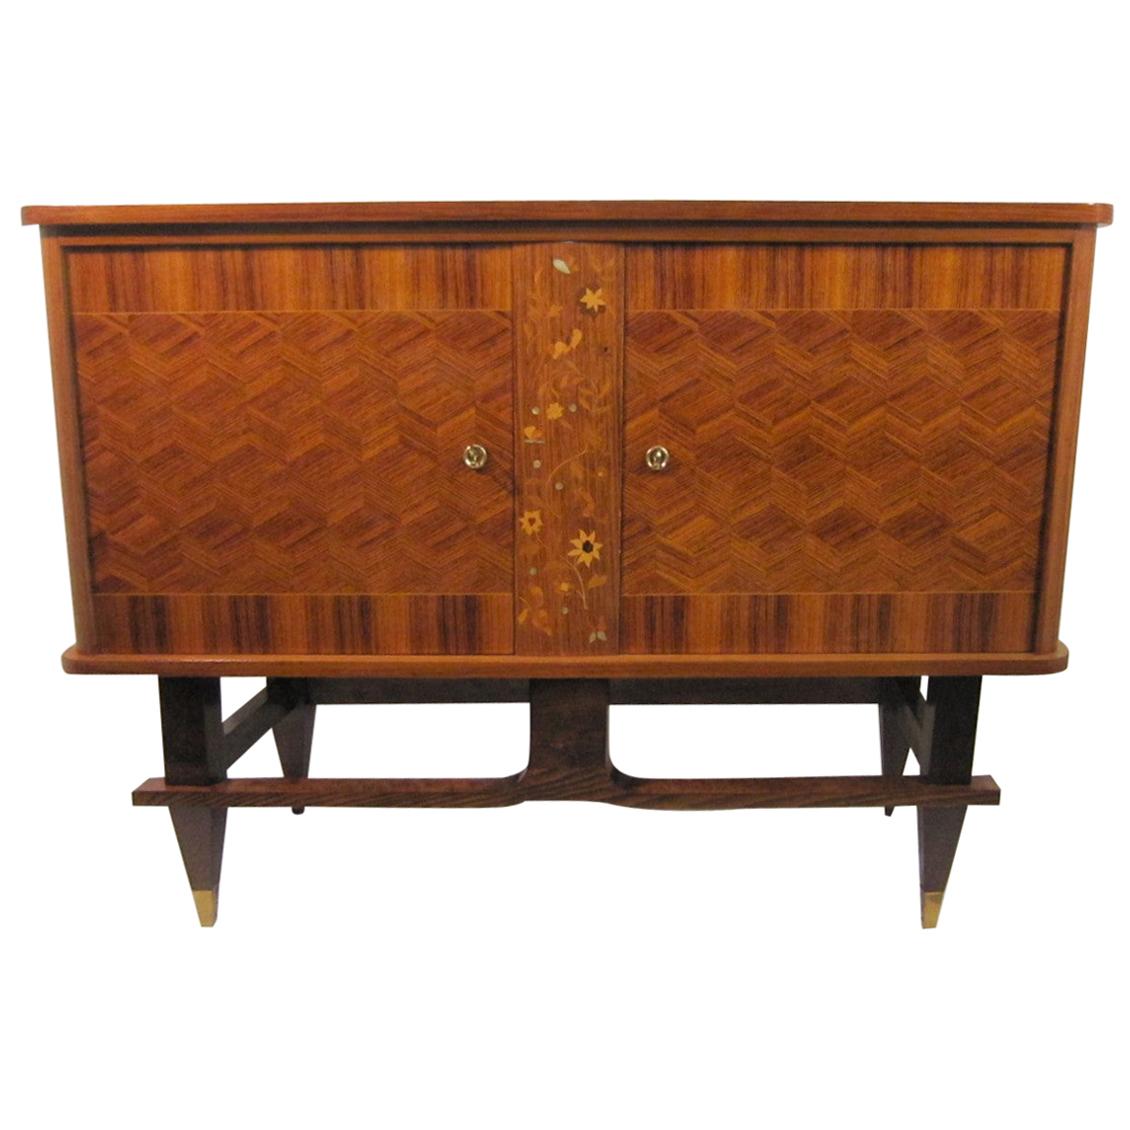 Small French Cabinet in Palisander with Marquetry and Parquetry Detail